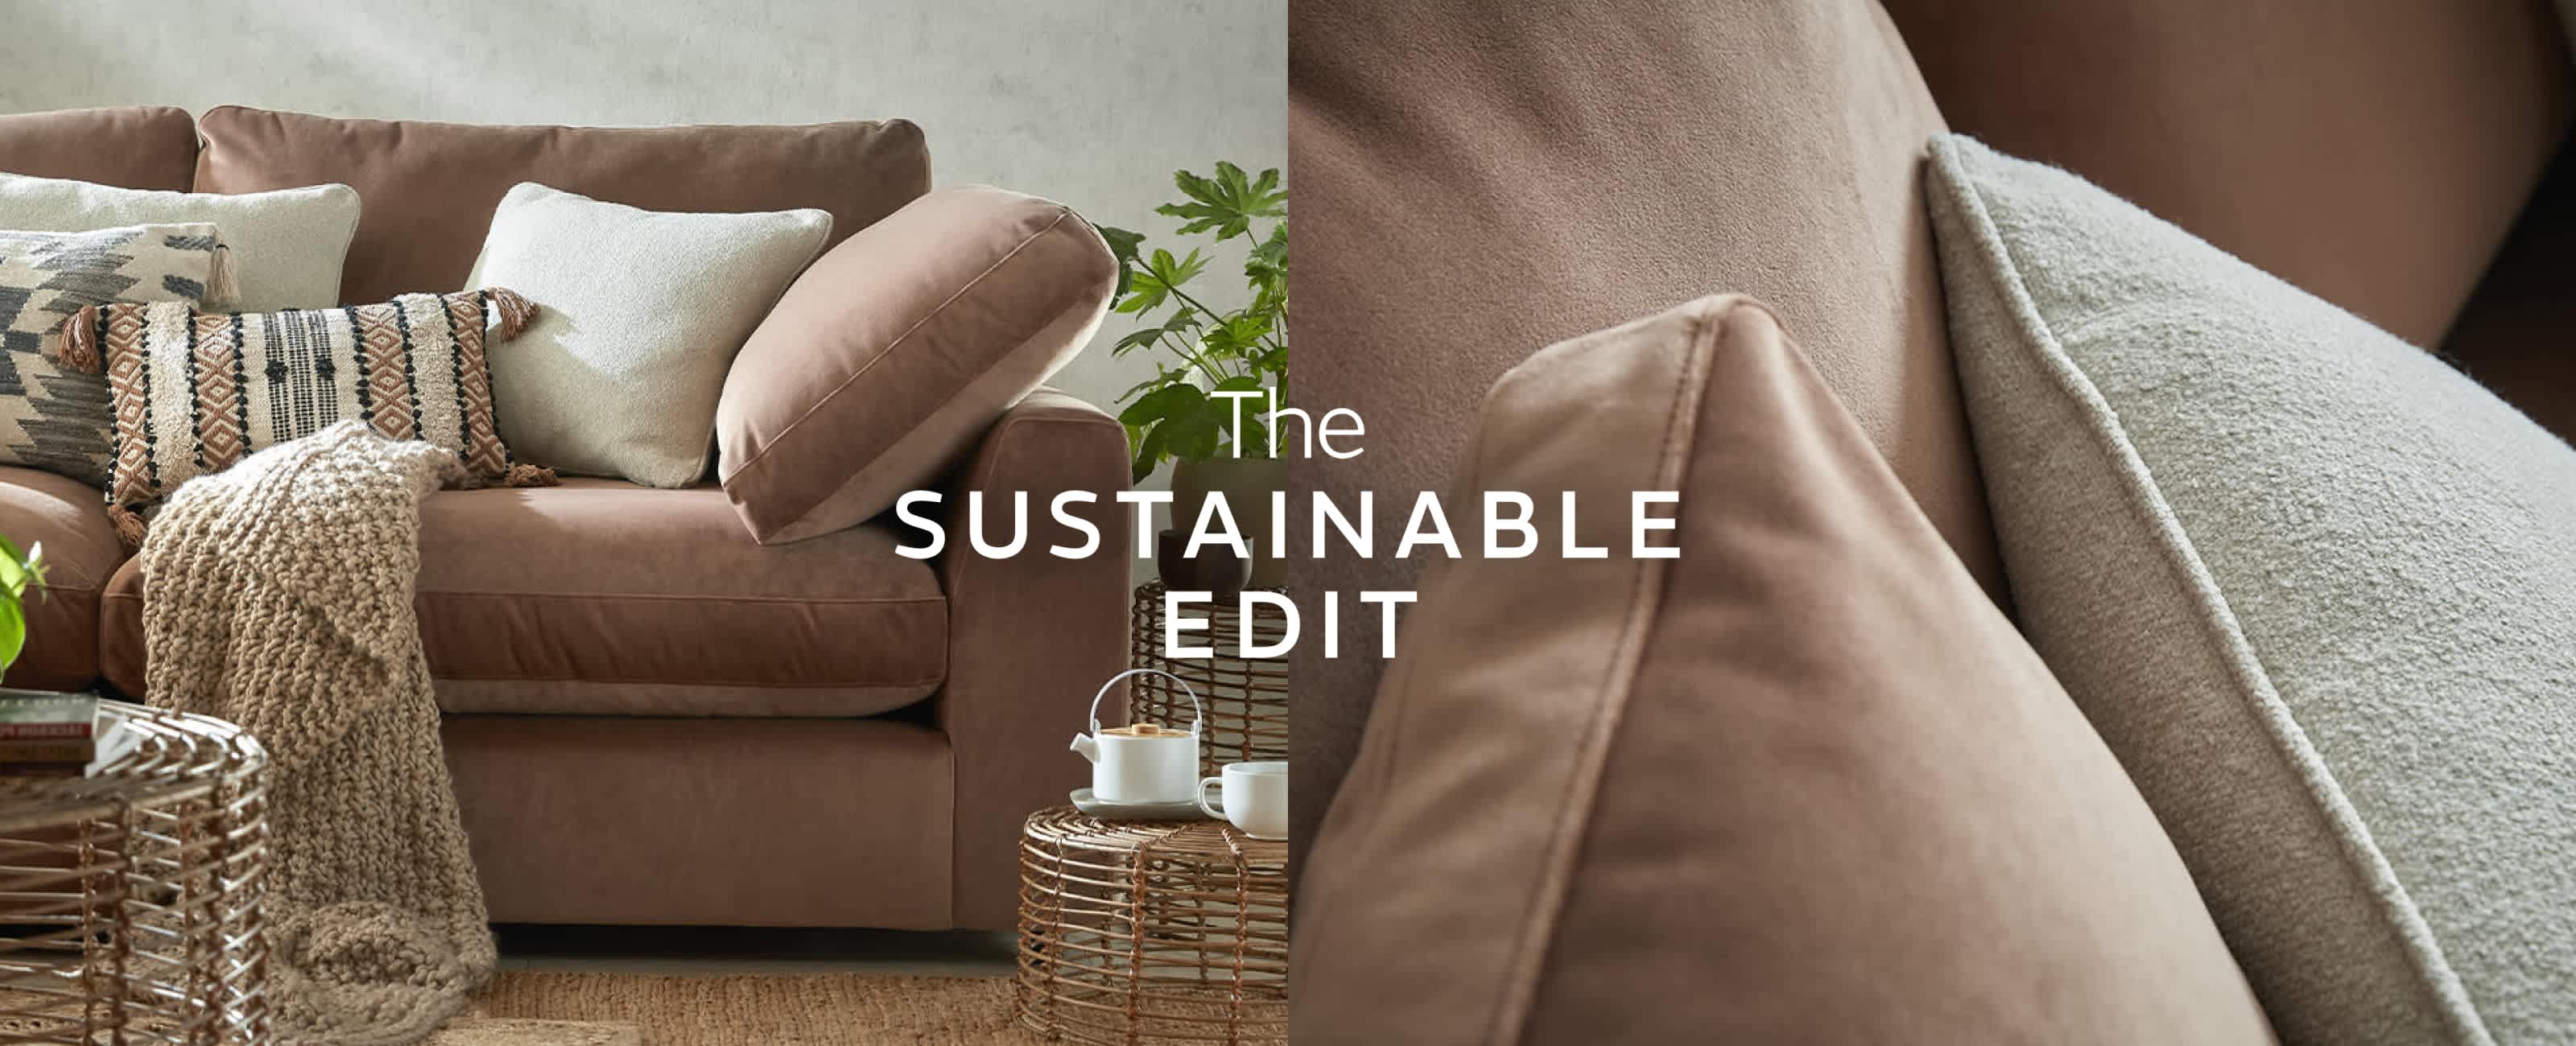 The sustainable edit